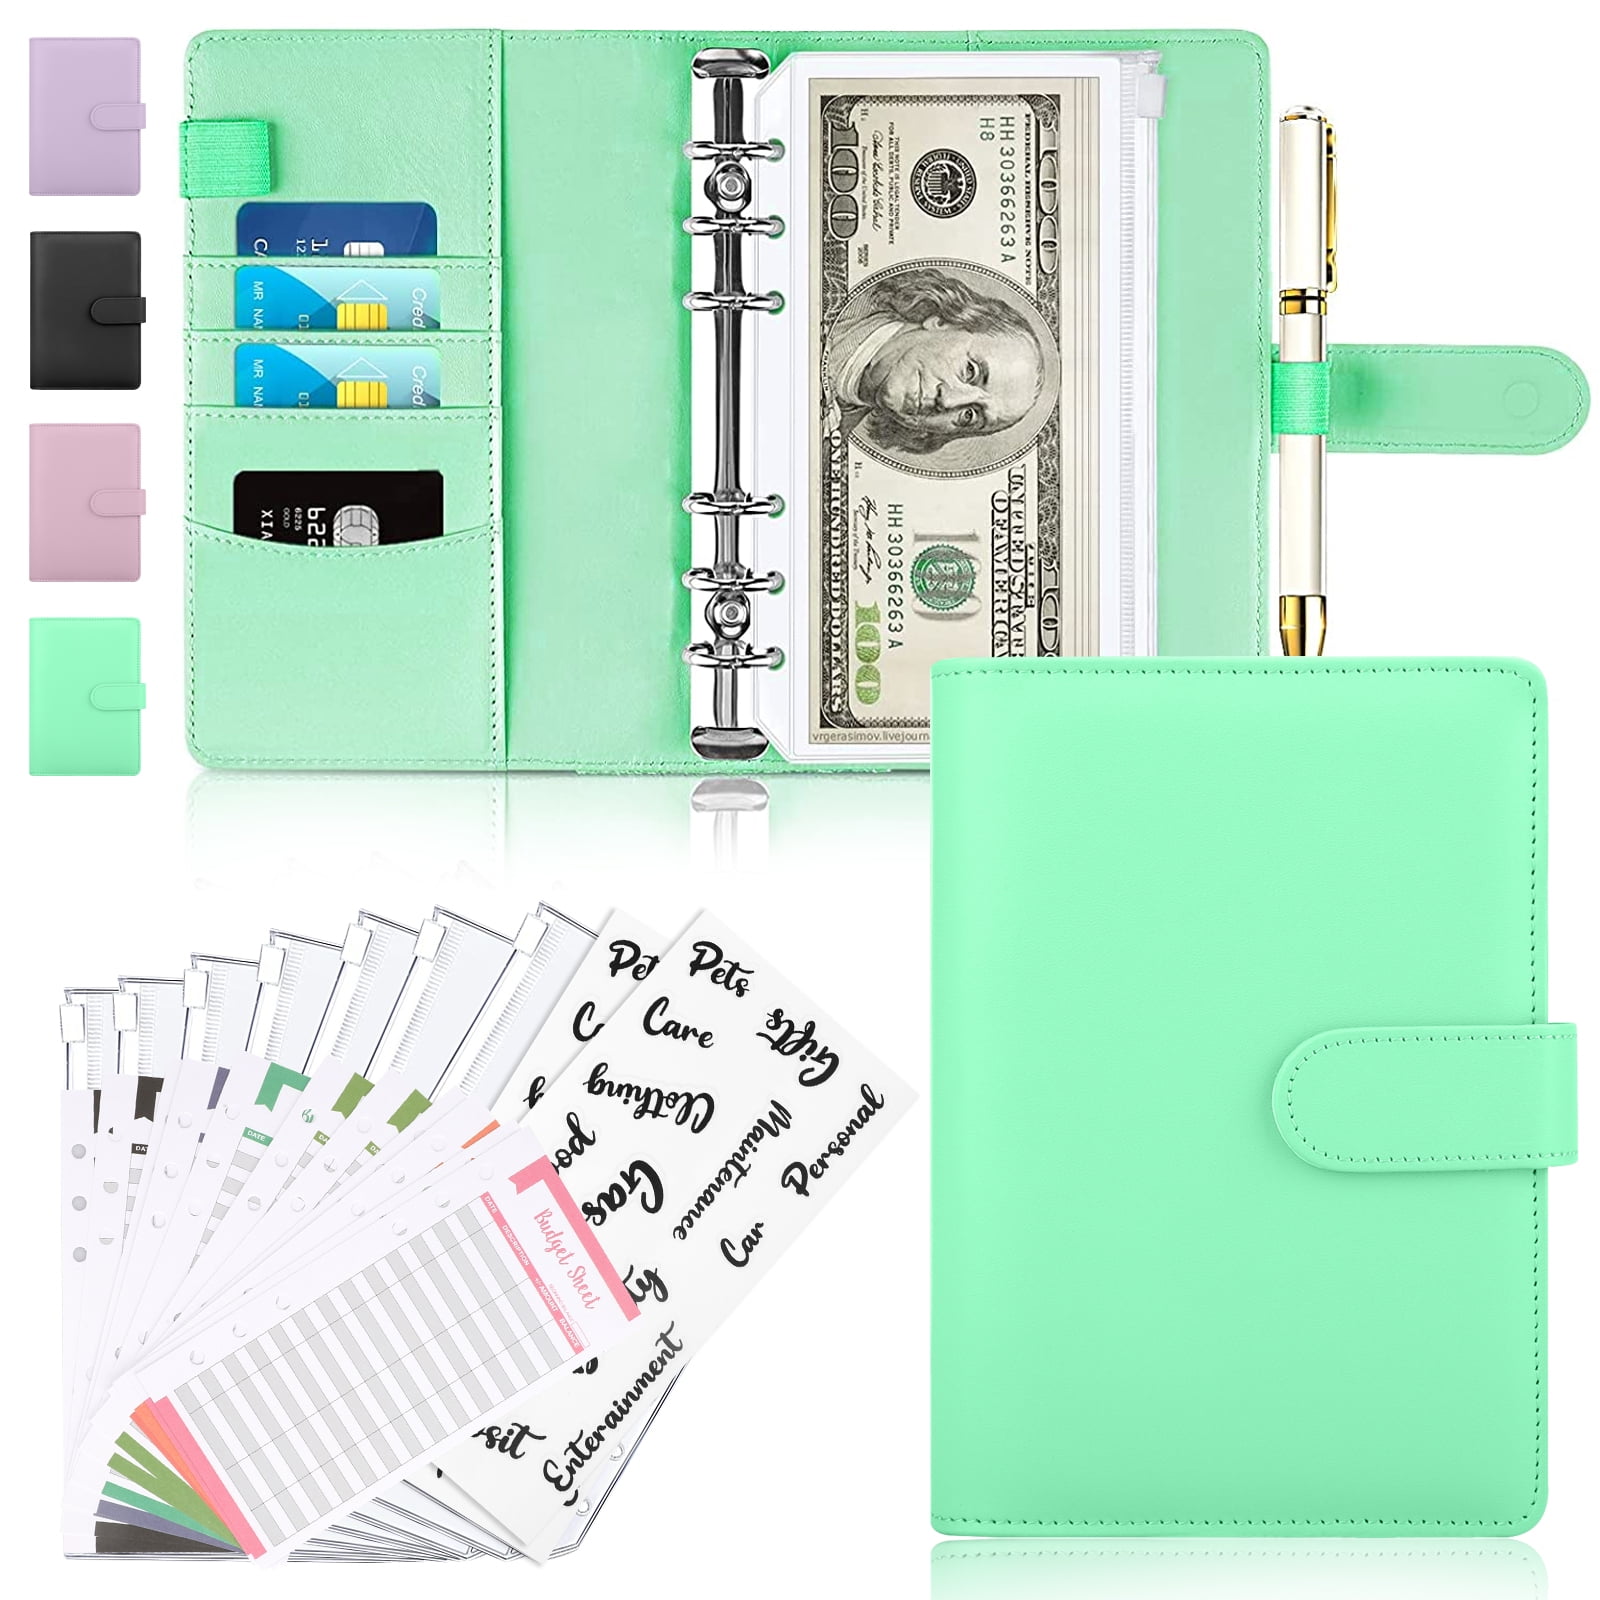 5 9 & 6 POCKETS for BINDERS COUPON SLEEVES ORGANIZERS 